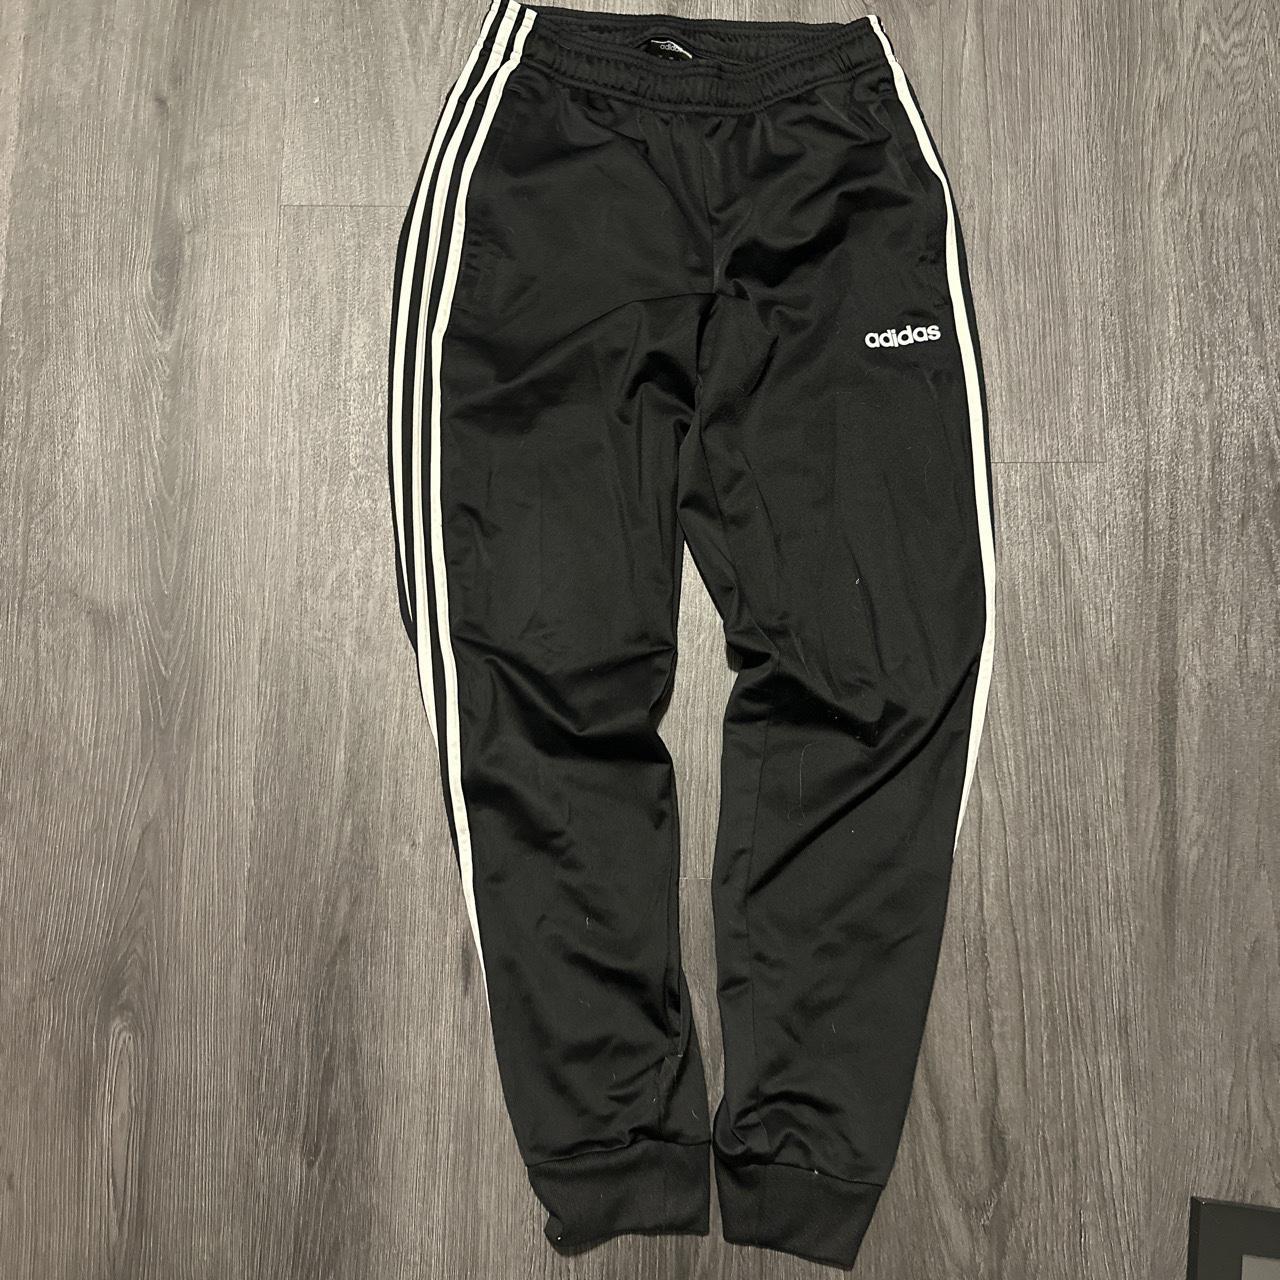 Adidas sweats in great condition Size small and... - Depop